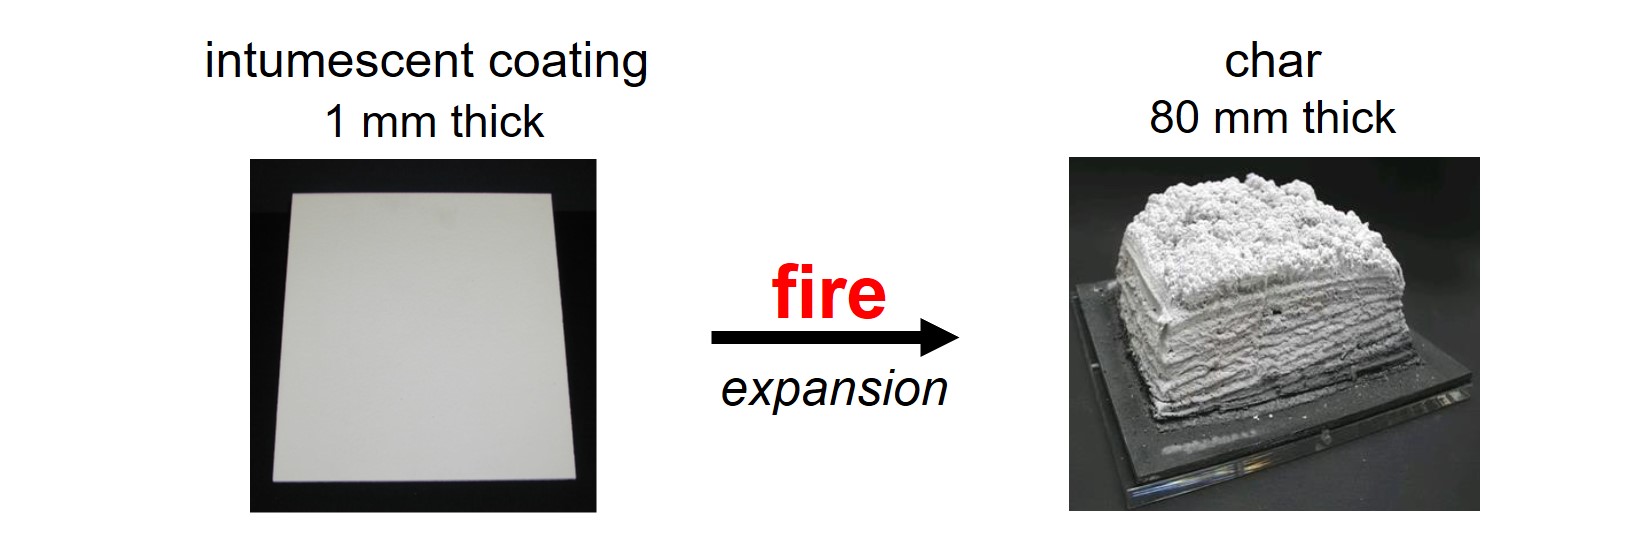 Expansion of an intumescent coating in a fire